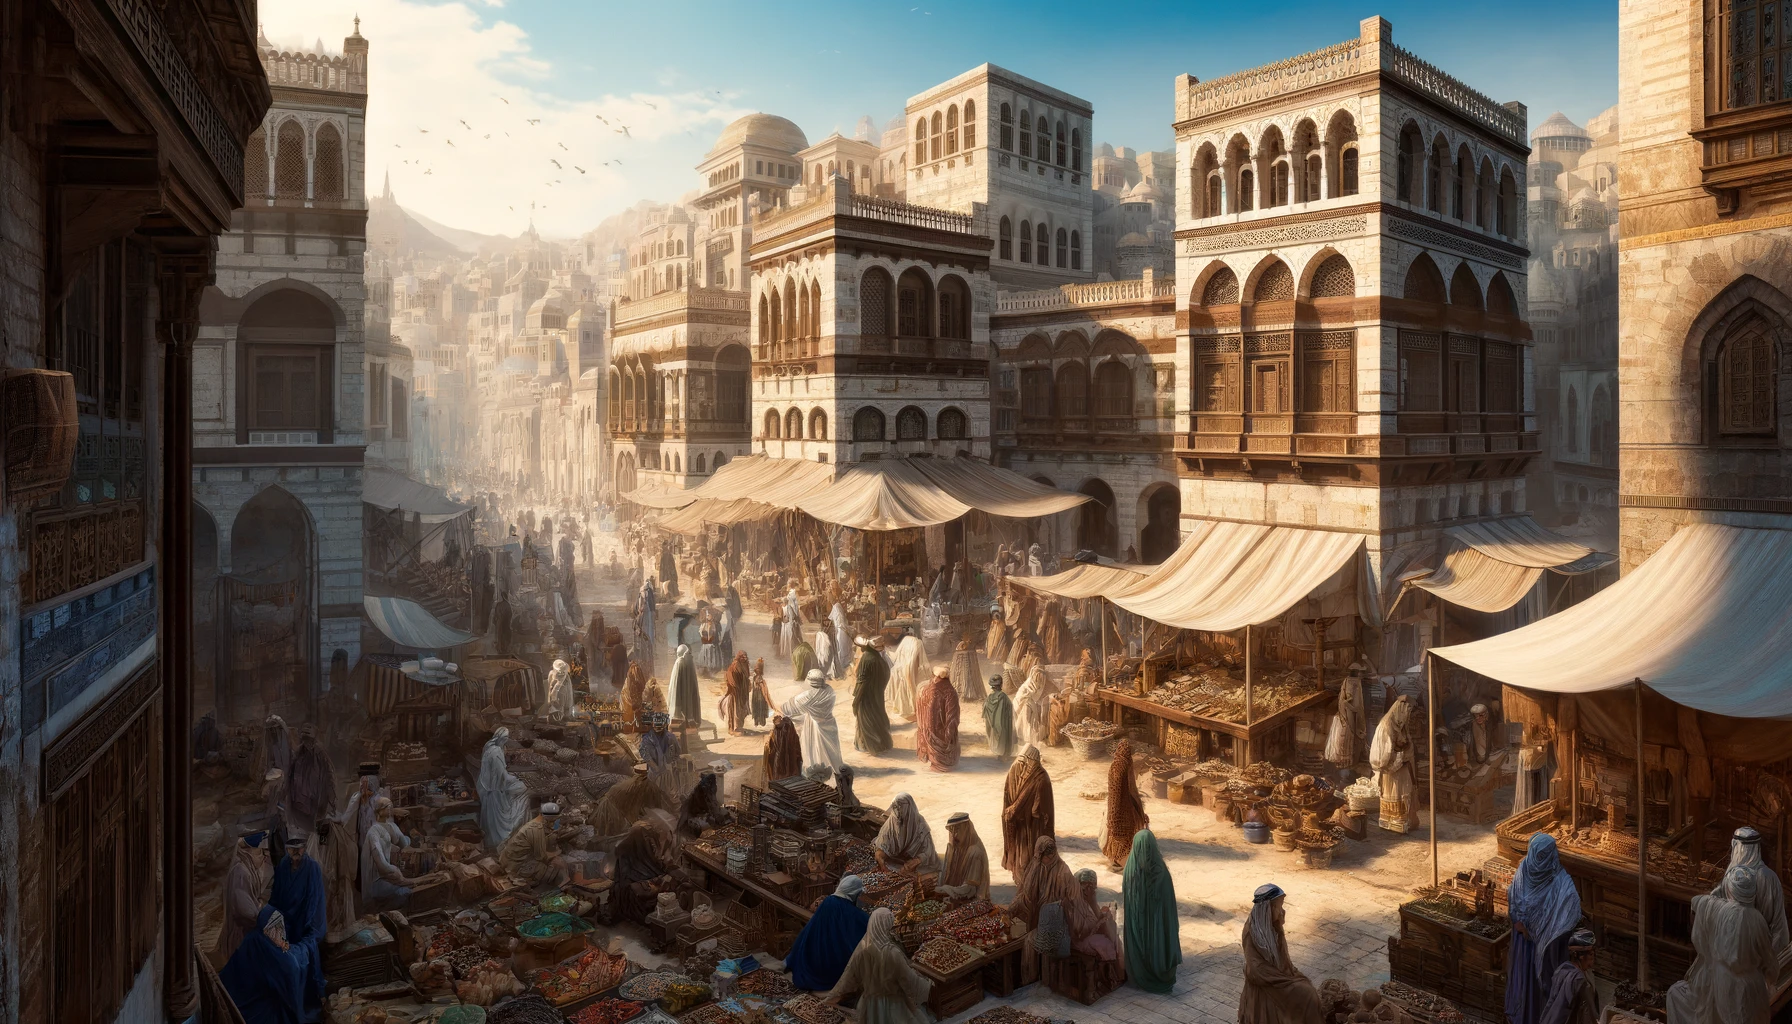 Arabian city scene during the time of Khadija bint Khuwaylid. This visual captures the bustling market streets and cultural richness of Mecca, reflecting the era's typical architecture and lively trade activities.